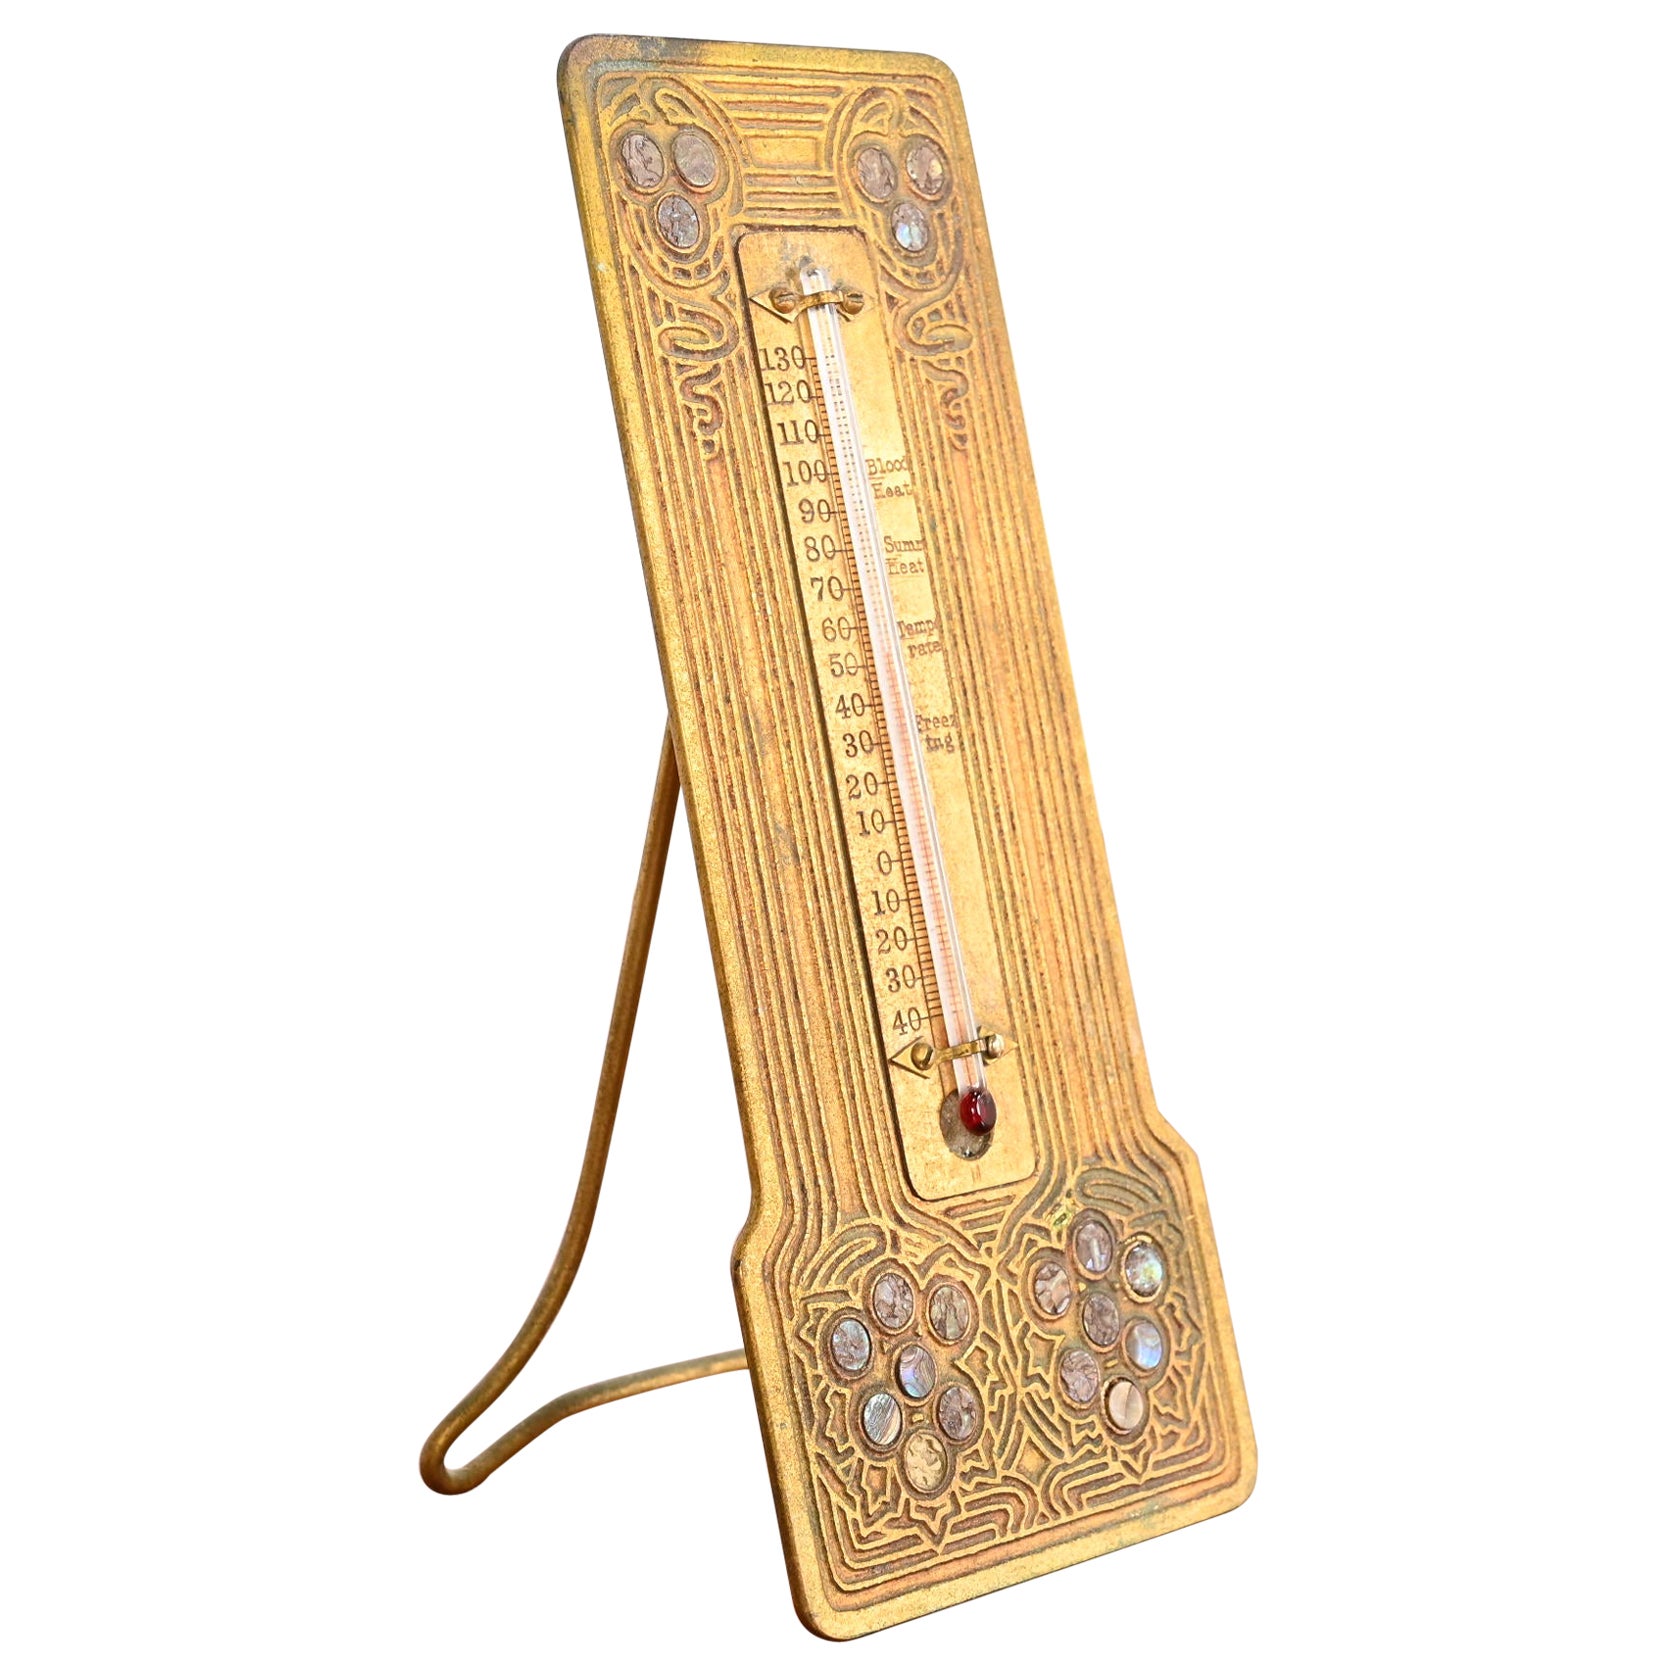 Tiffany Studios New York Bronze Doré and Abalone Thermometer